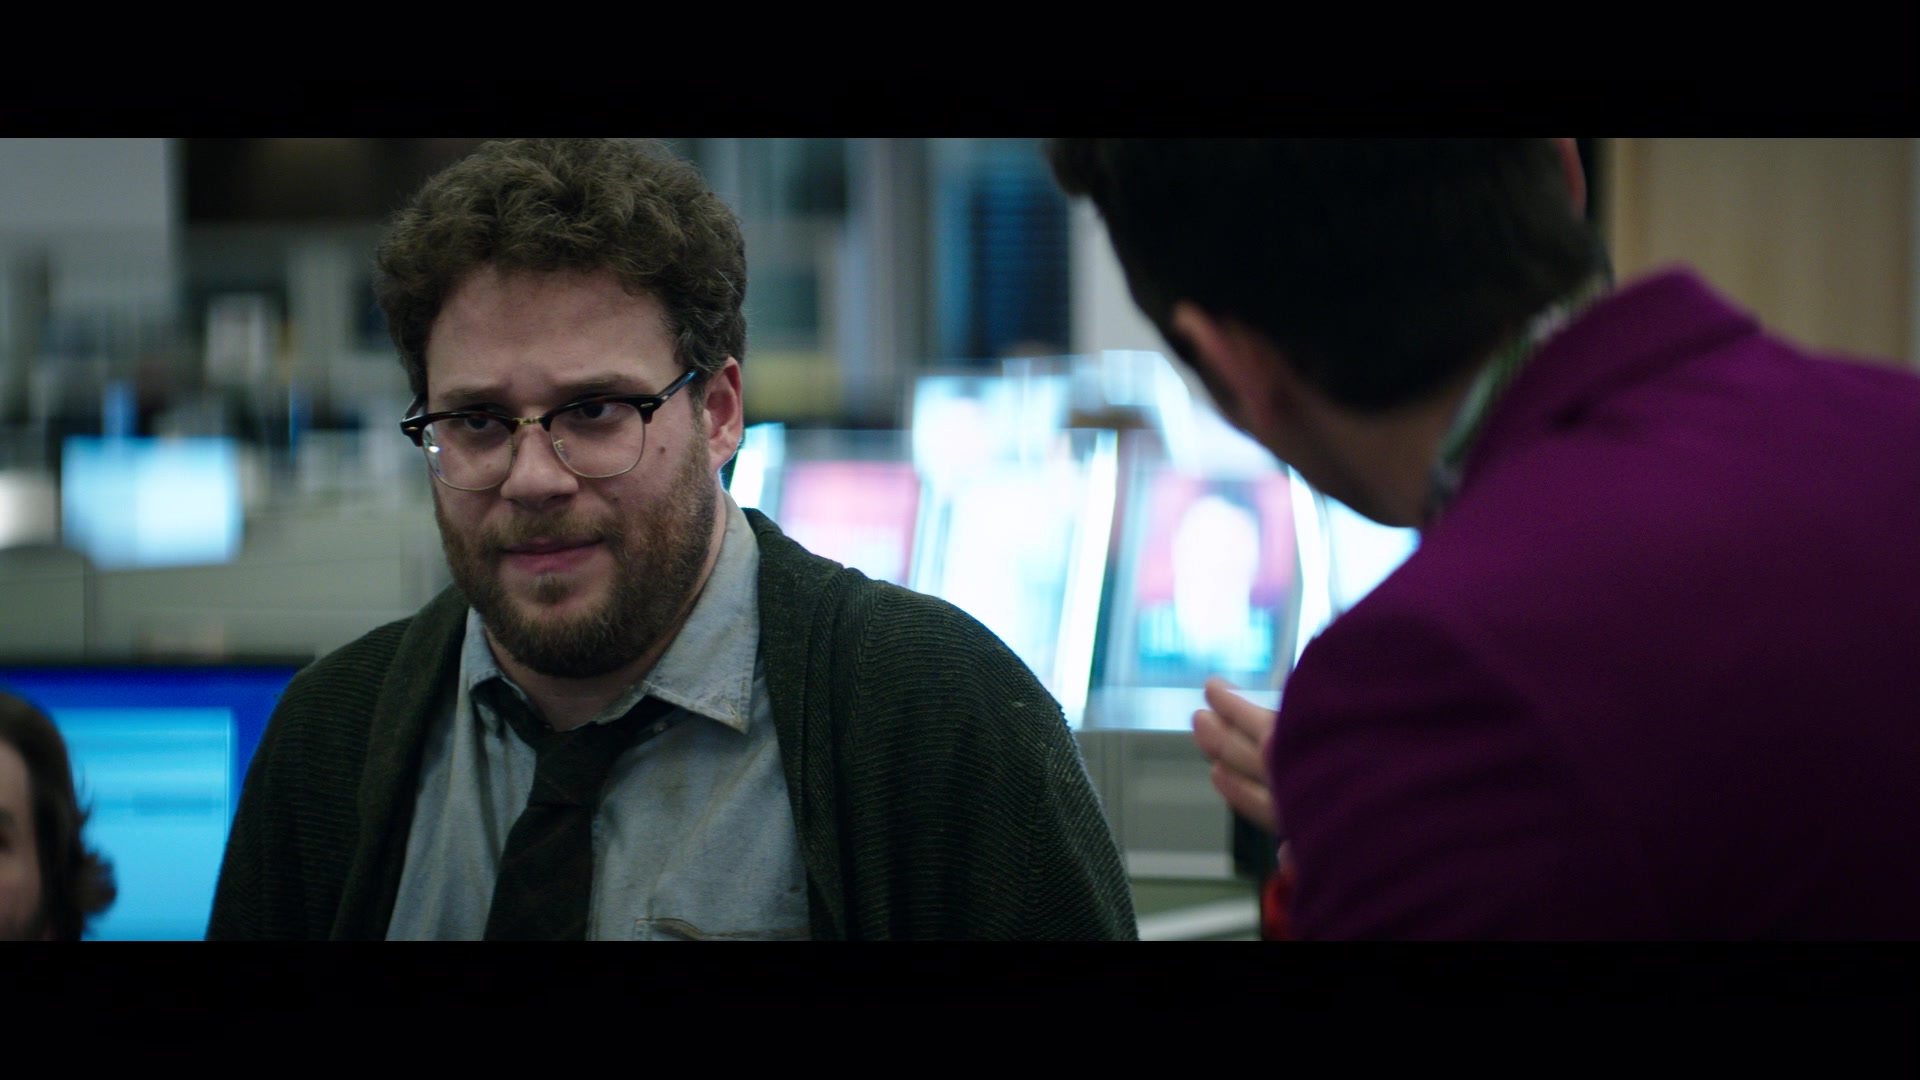 Aaron Rappaport (Seth Rogen) is unsure about David Skylark's (James Franco) plan to get access to North Korea in The Interview (2014), Sony Pictures